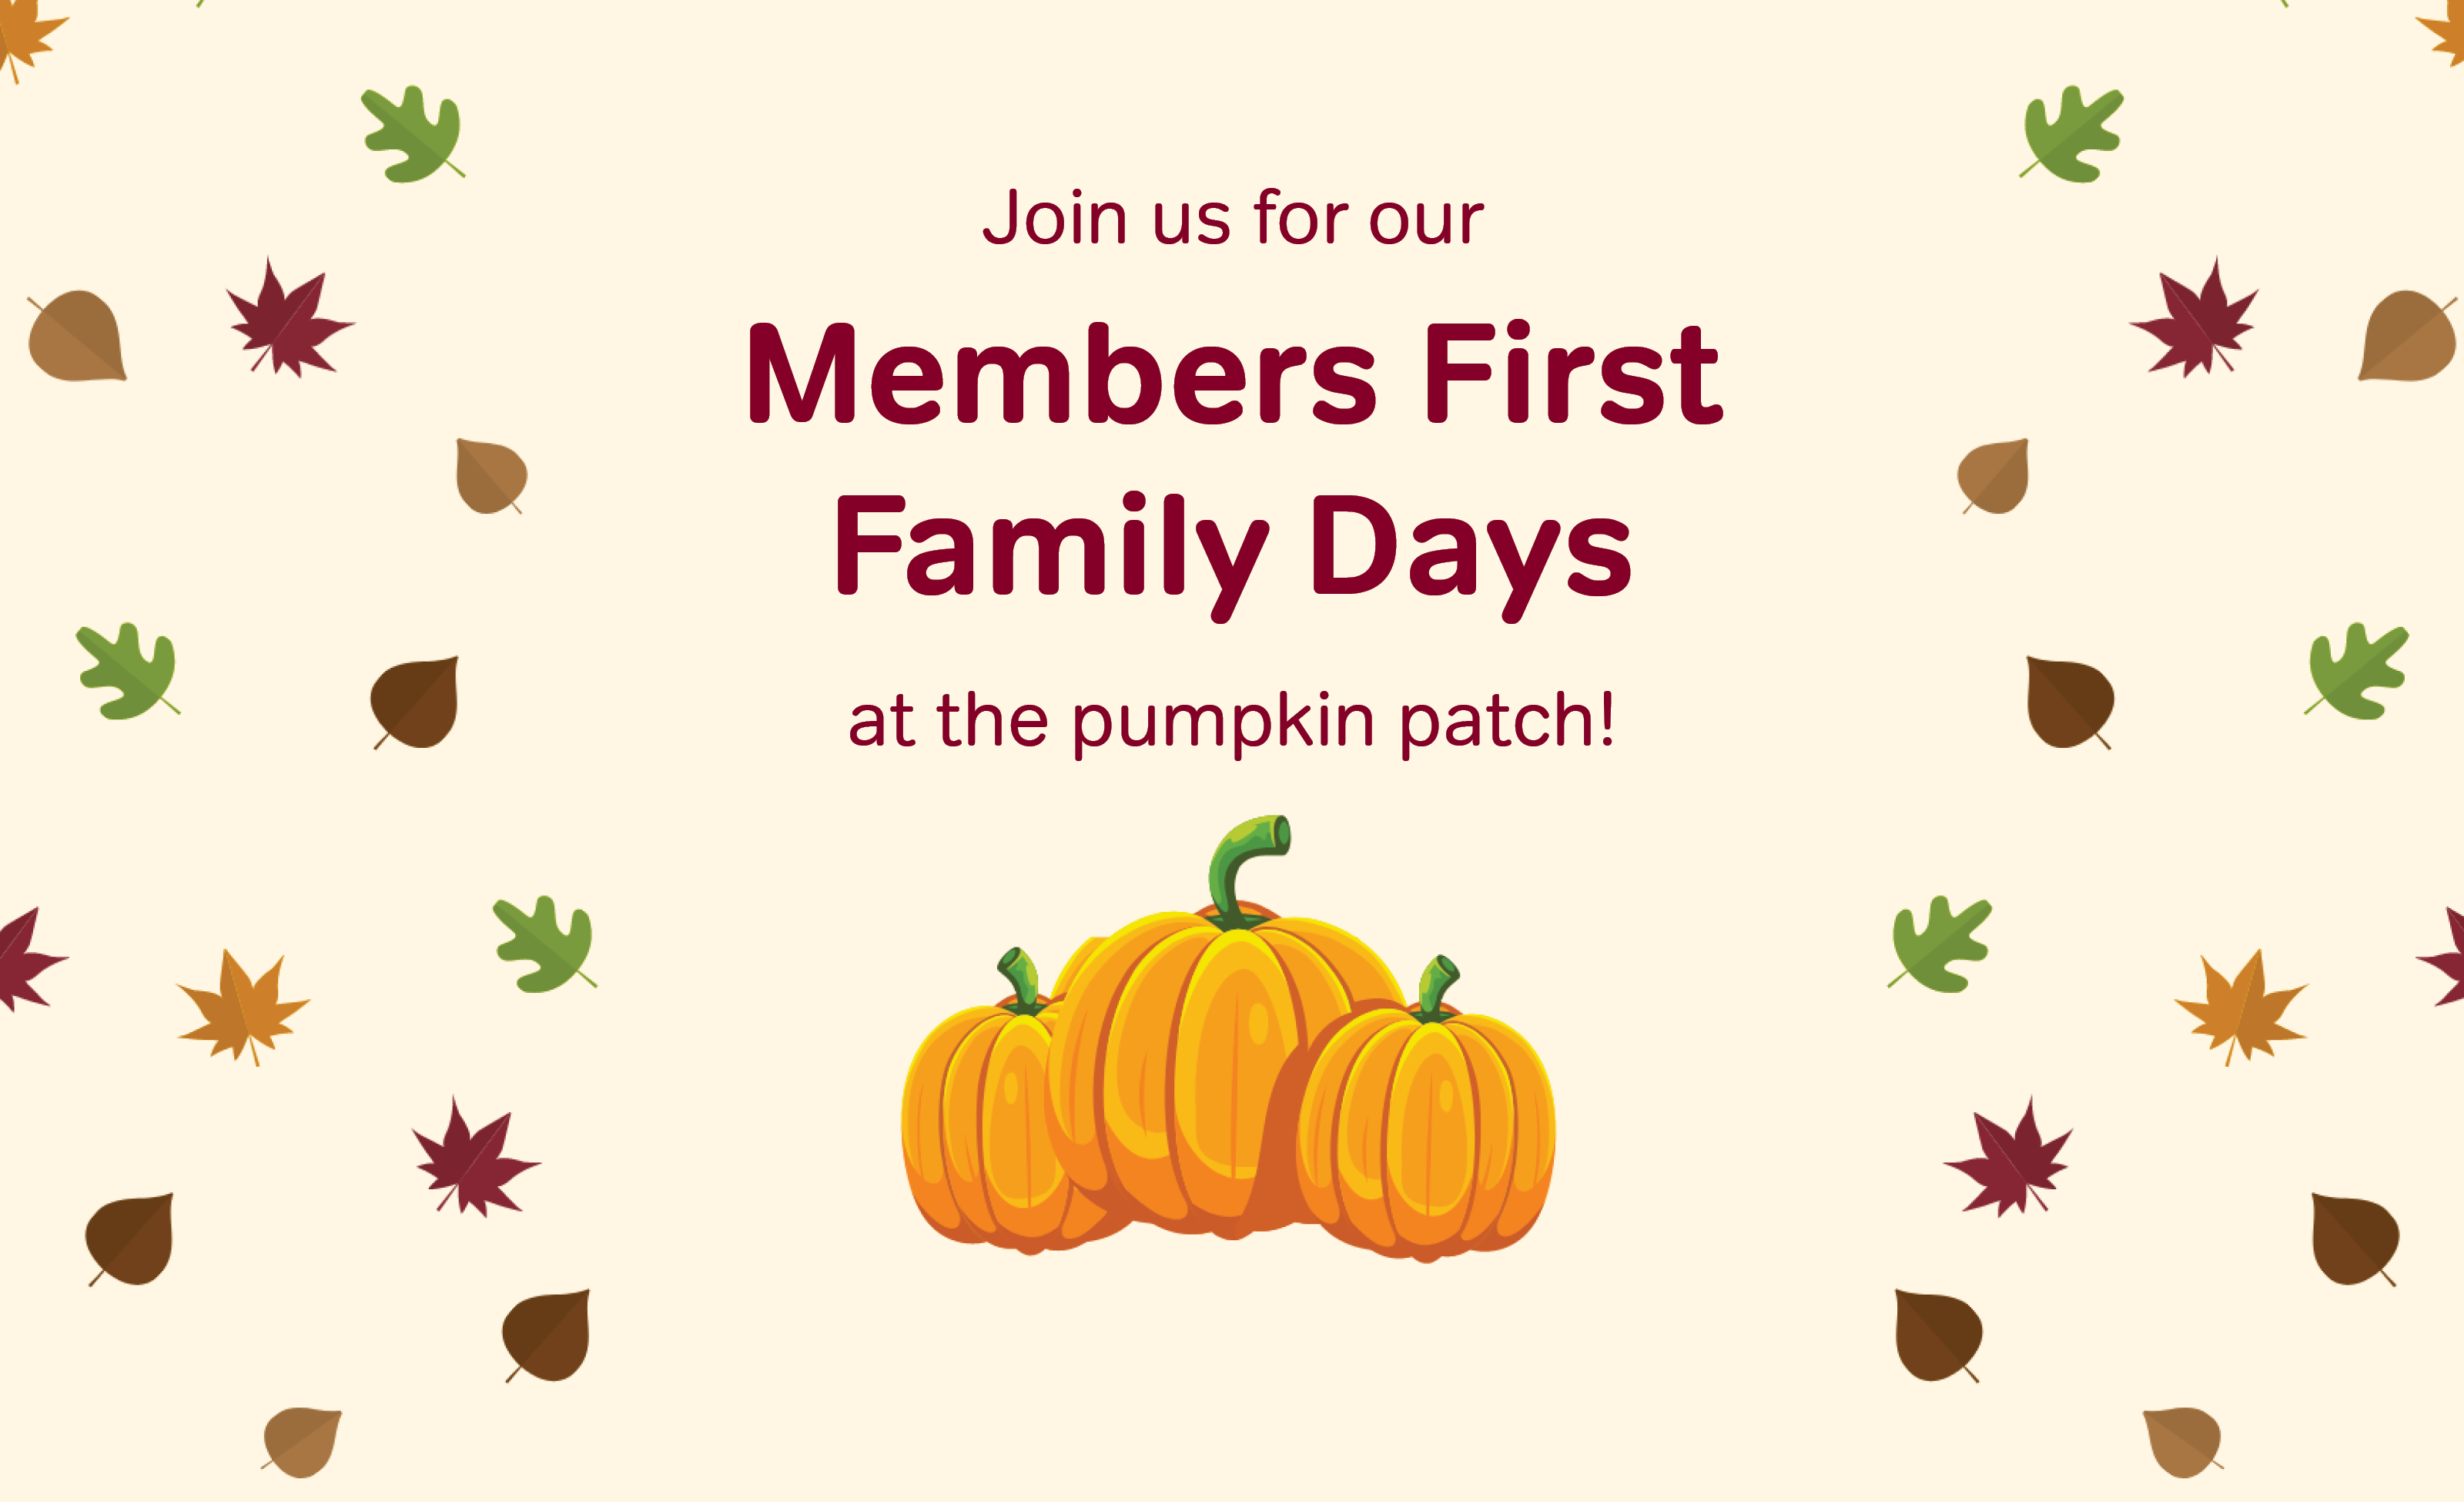 Join us for our Members First Family Days at the pumpkin patch!